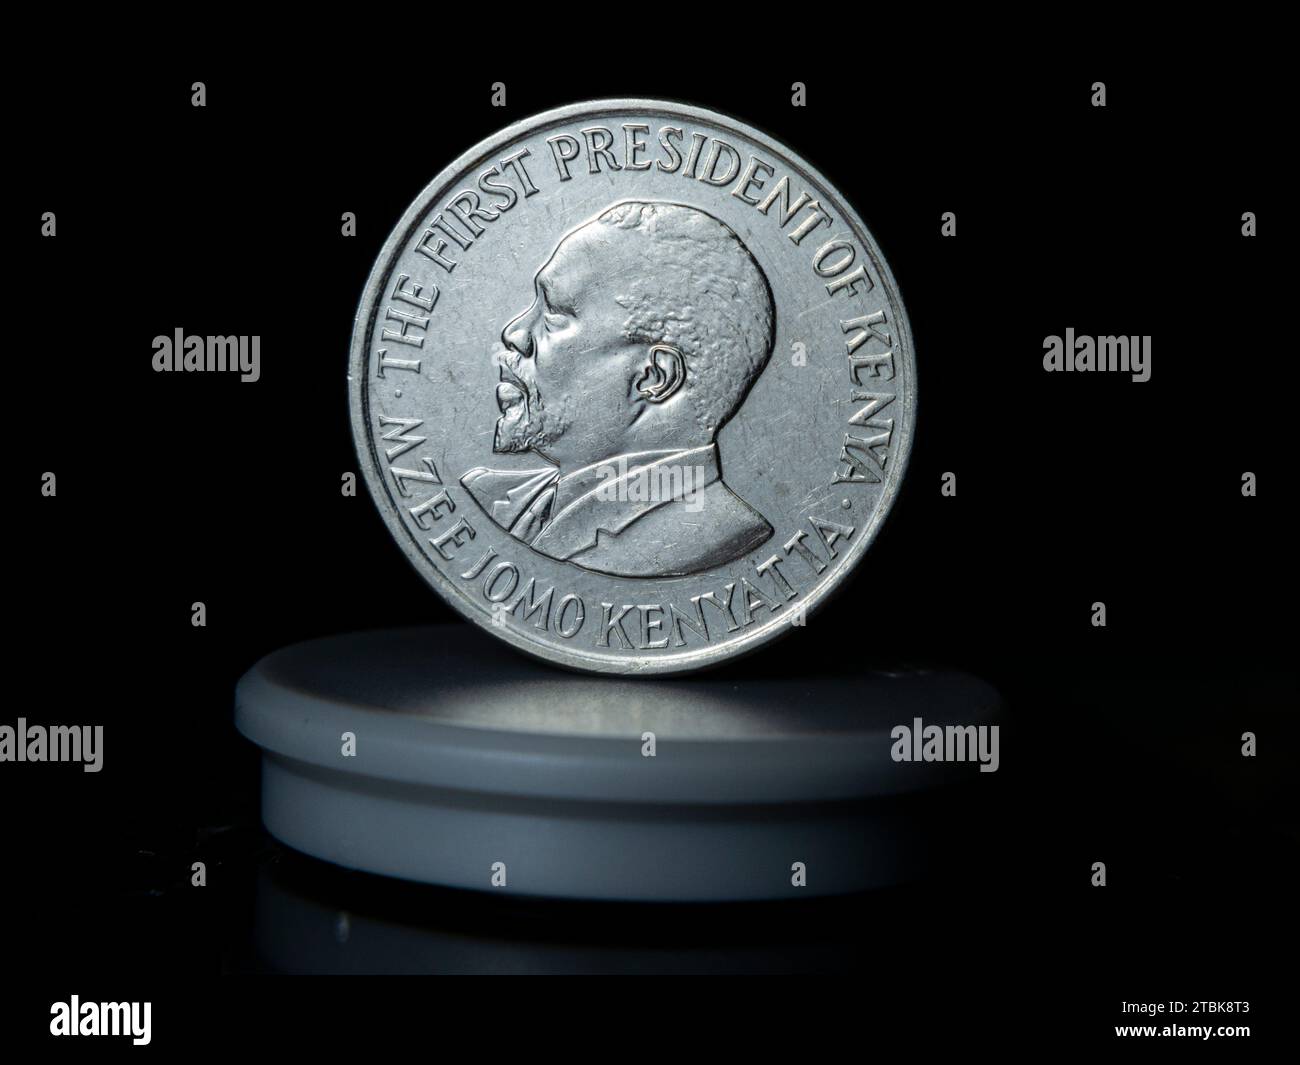 An isolated, silver-colored coin featuring a portrait of a President on the front is shown in the foreground with a plain background Stock Photo